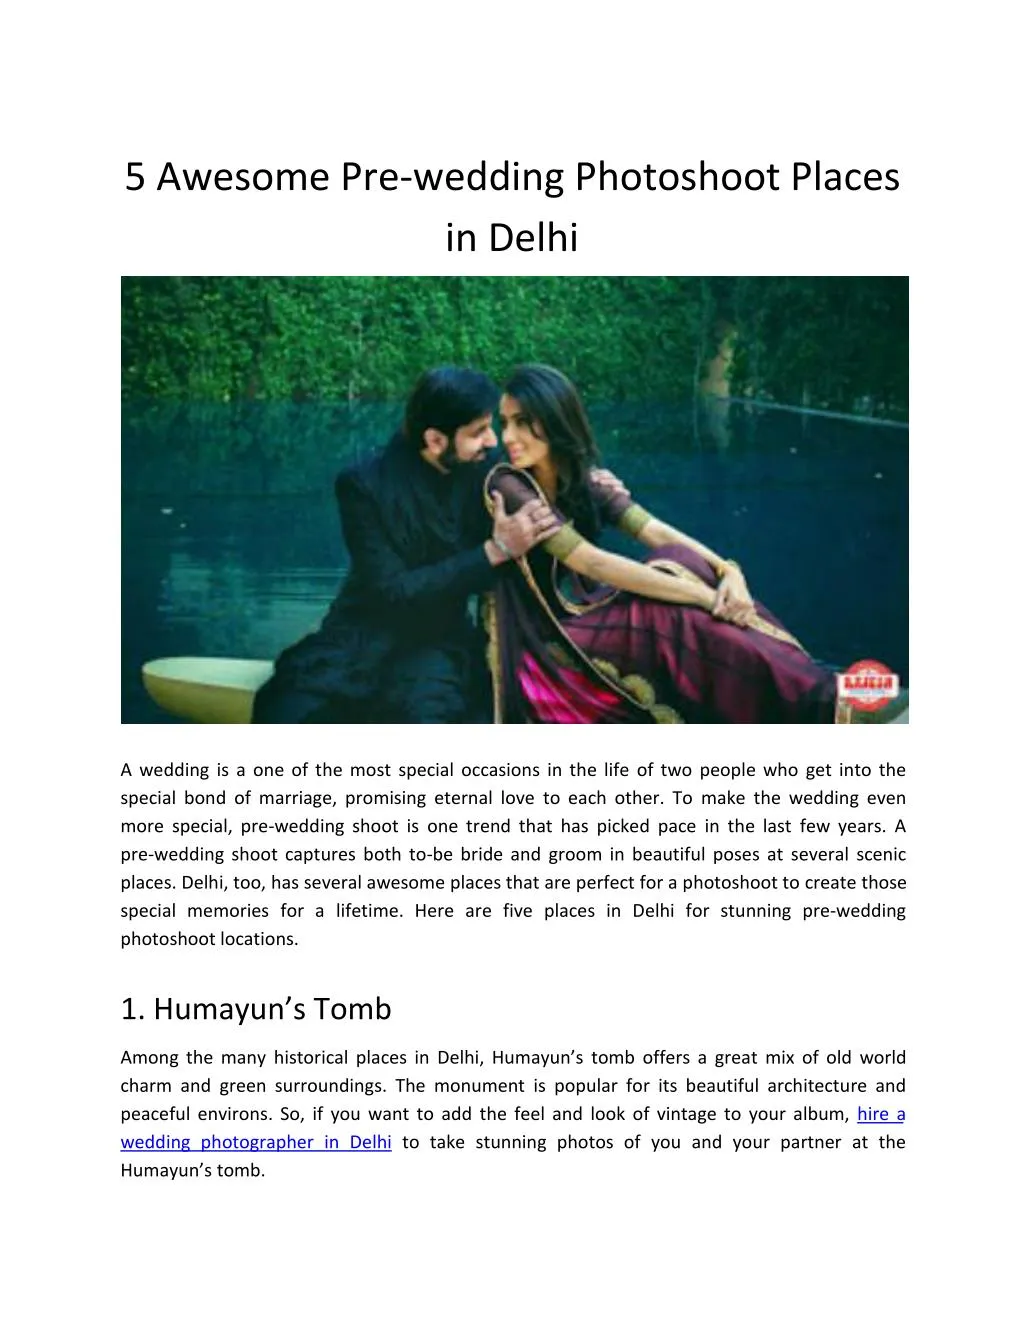 5 awesome pre wedding photoshoot places in delhi